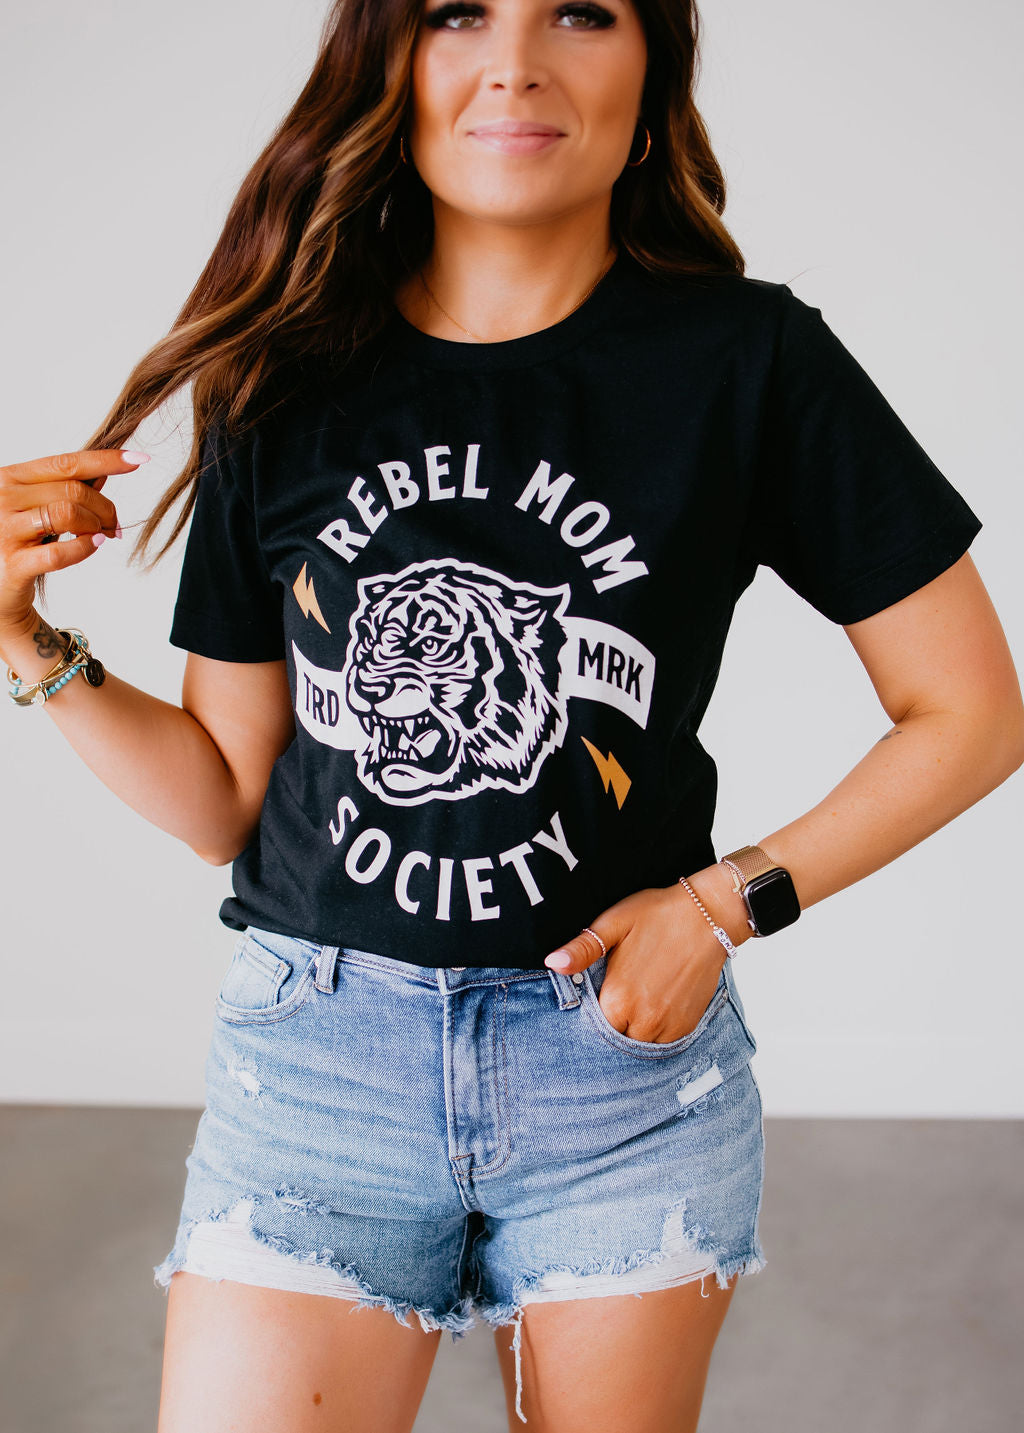 image of Rebel Mom Society Graphic Tee